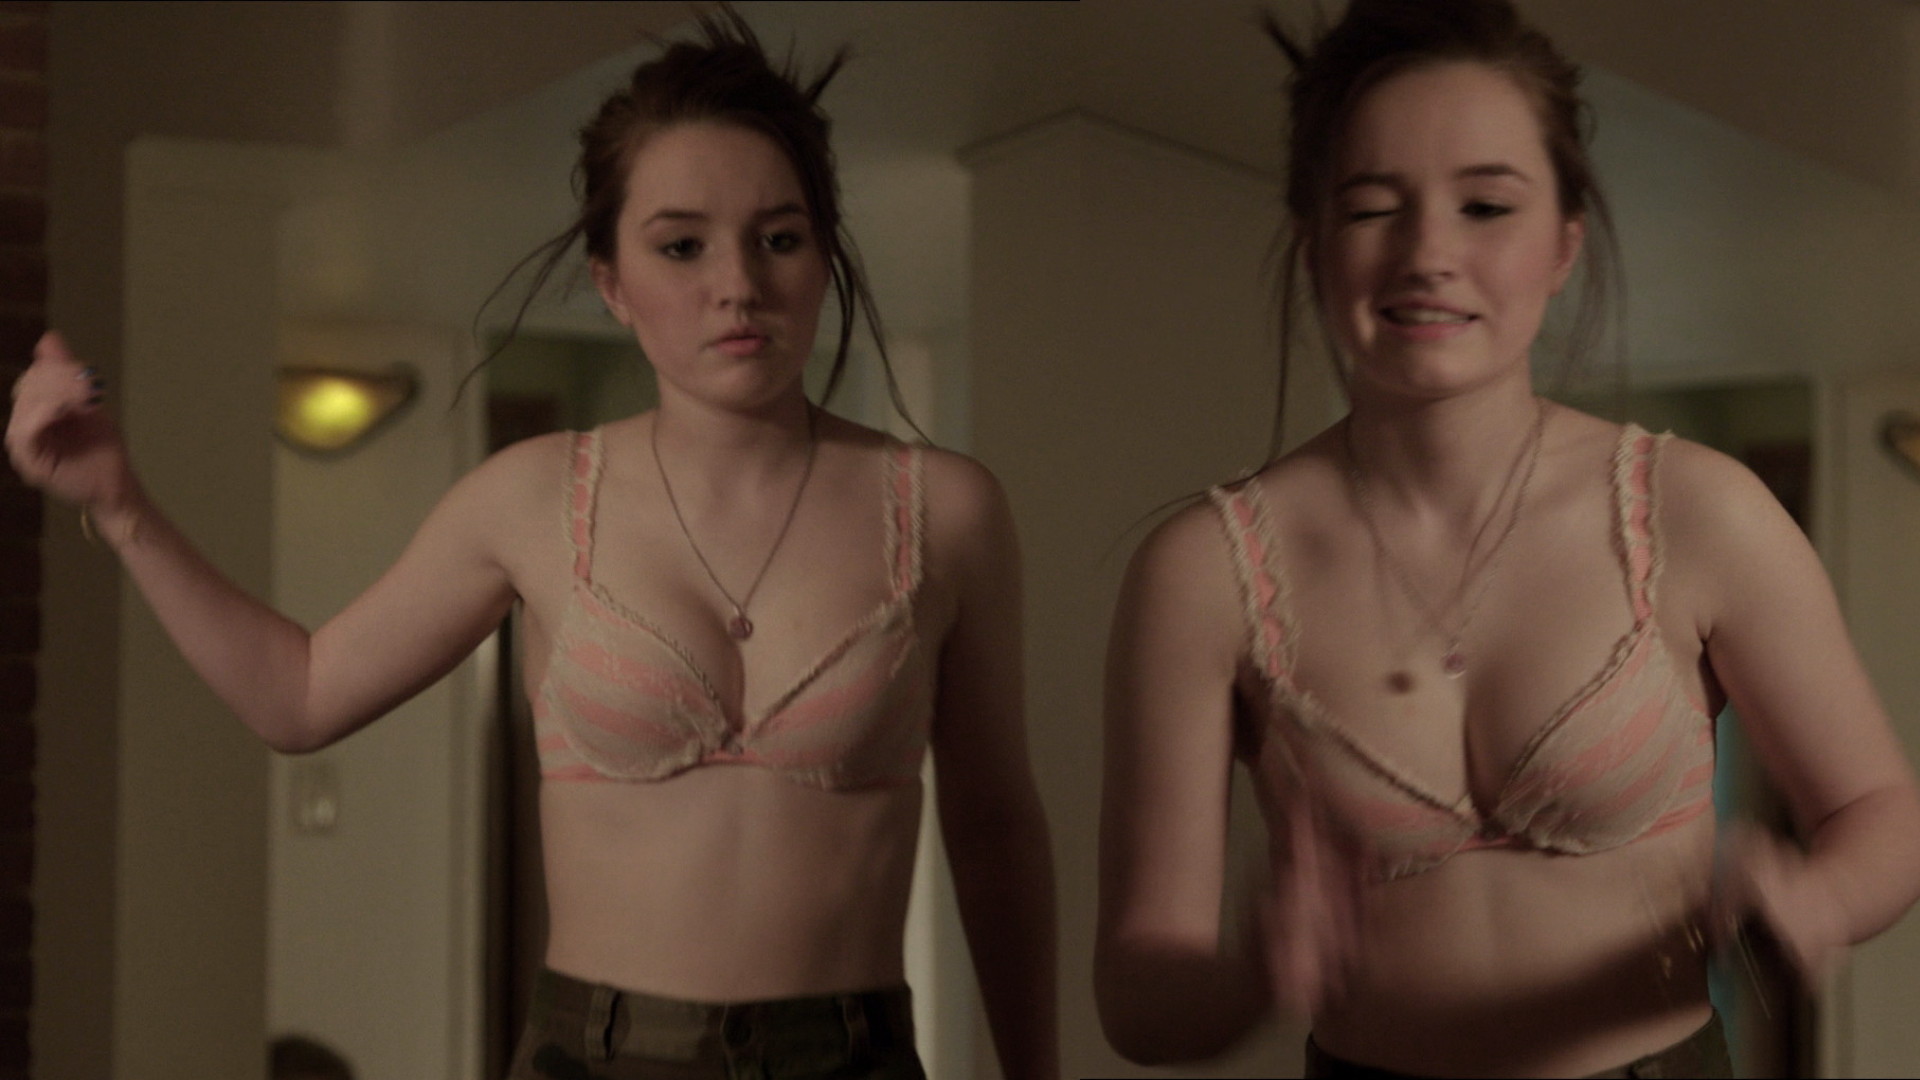 Kaitlyn Dever Nude Pics Page 1 Free Download Nude Photo Gallery.